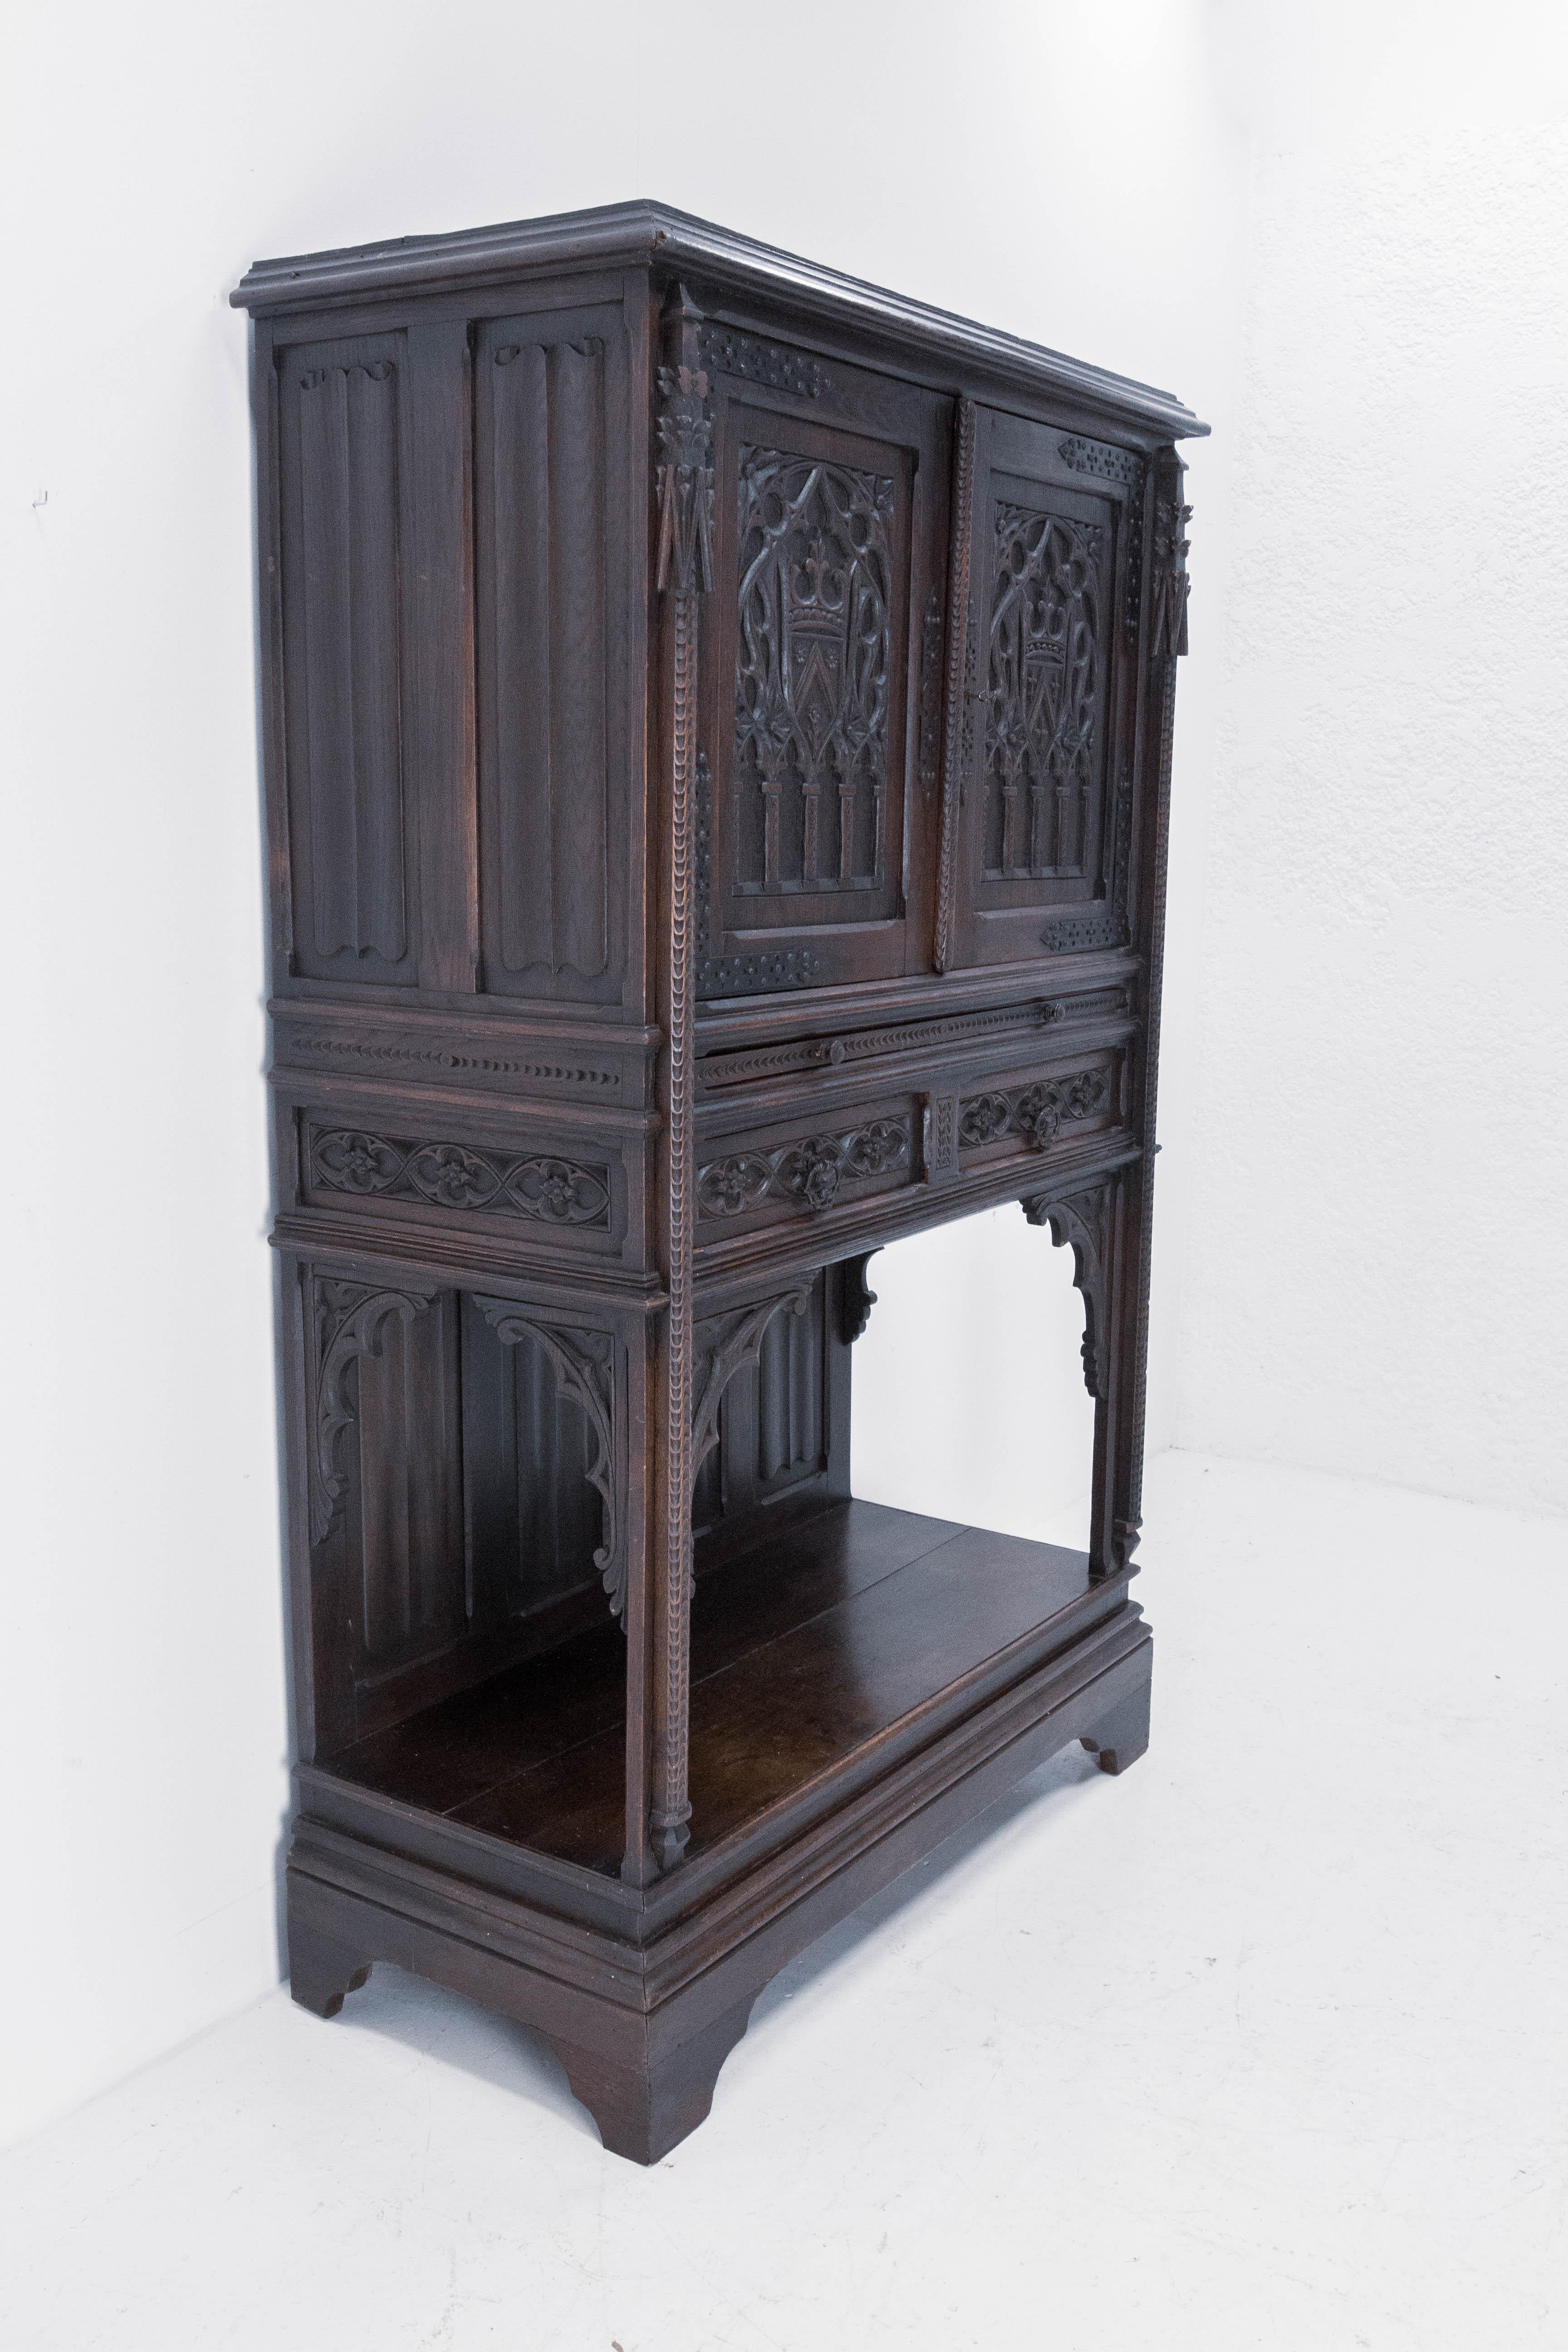 Buffet dressoir French cabinet, circa 1890
Two doors, two drawers, a retractable shelf
Height of the shelf 40.16 in. (107 cm)
Gothic Revival, solid oak
Nice patina
Good antique condition

Shipping: 
L116 P50.5 H180 72 kg.